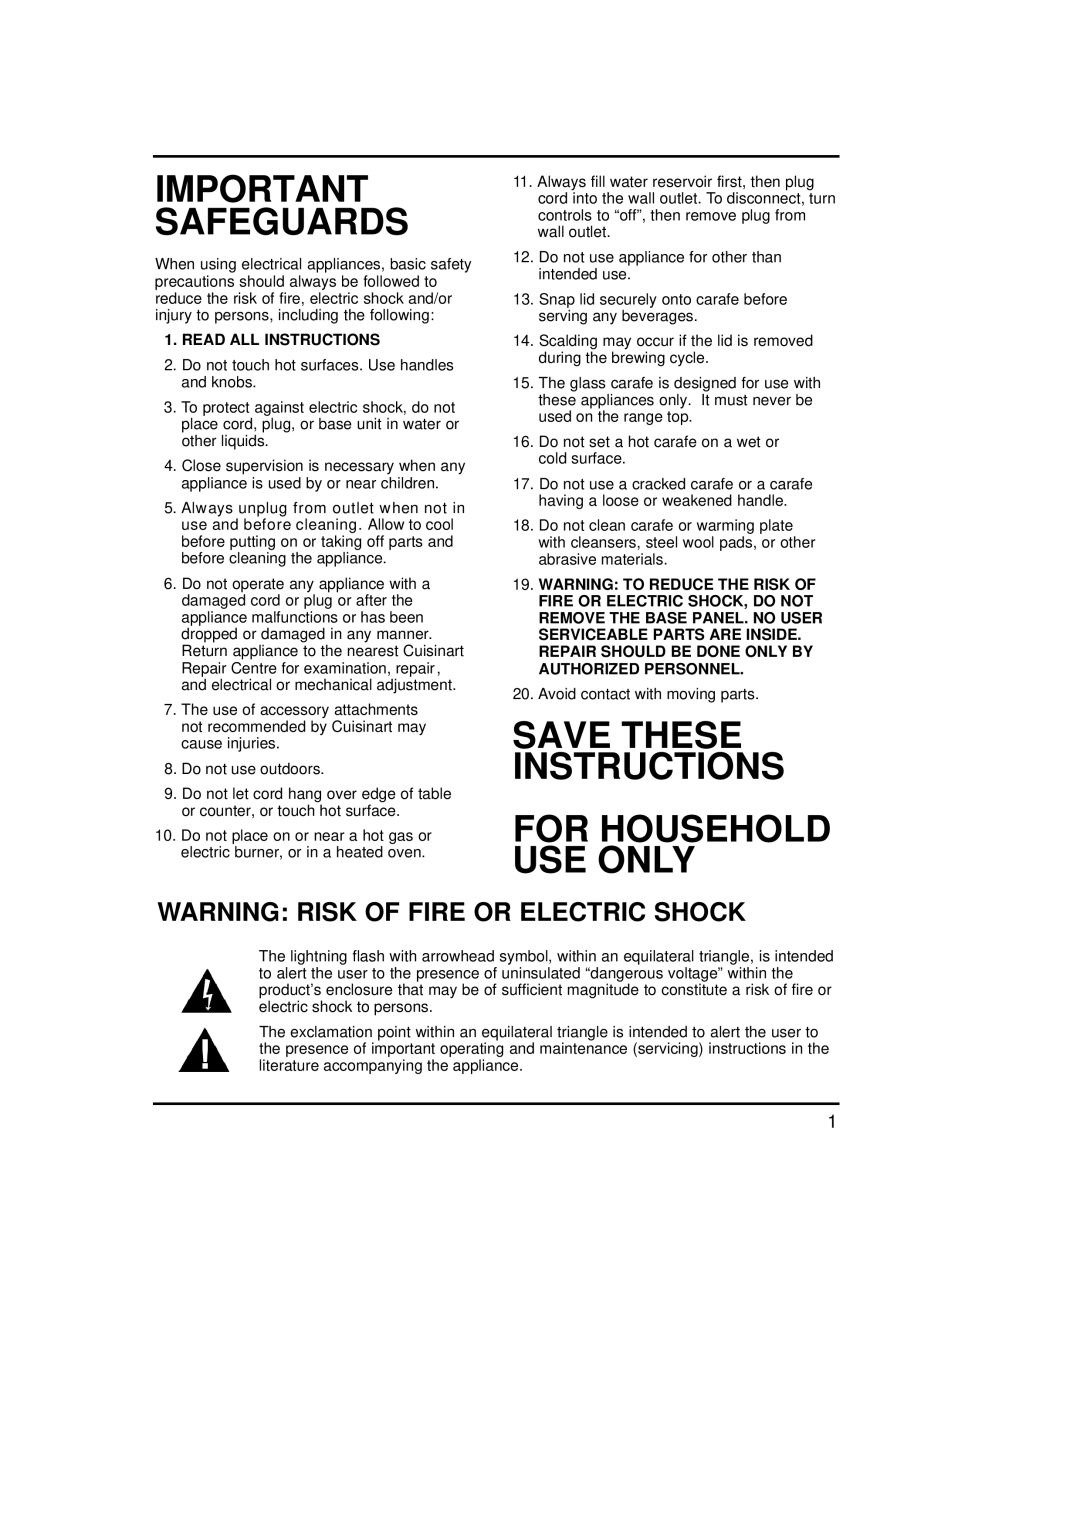 Cuisinart DCC-900C manual Important Safeguards, Warning Risk Of Fire Or Electric Shock, Read All Instructions 